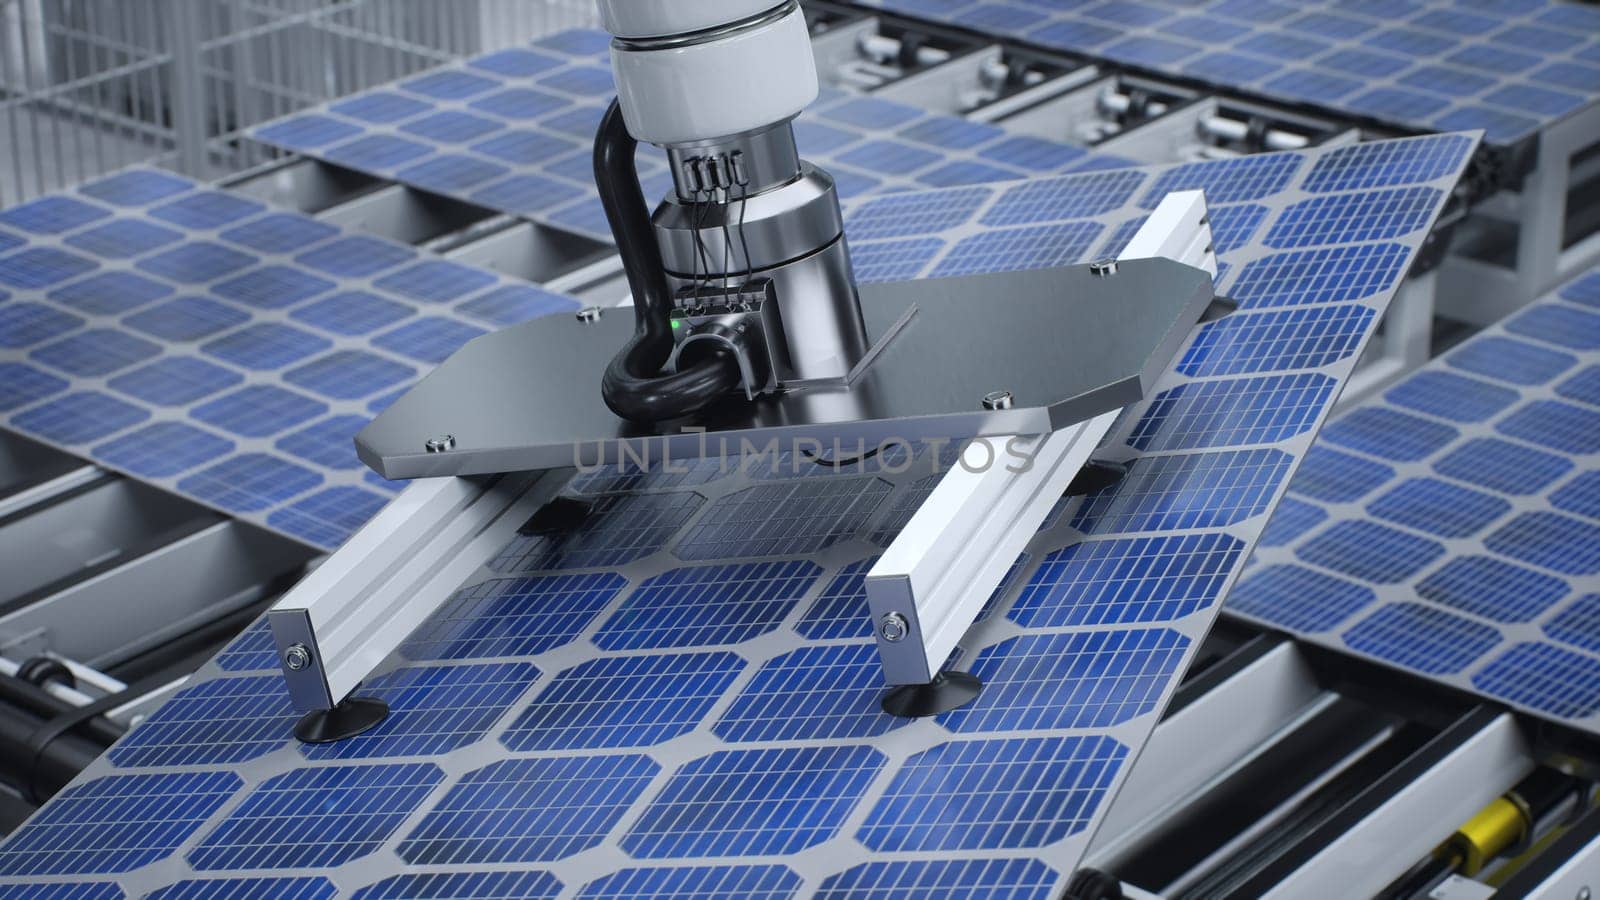 Solar panel placed on conveyor belt, operated by robot arm, moving around facility, 3D illustration. Close up of photovoltaic cell produced in green technology manufacturing warehouse